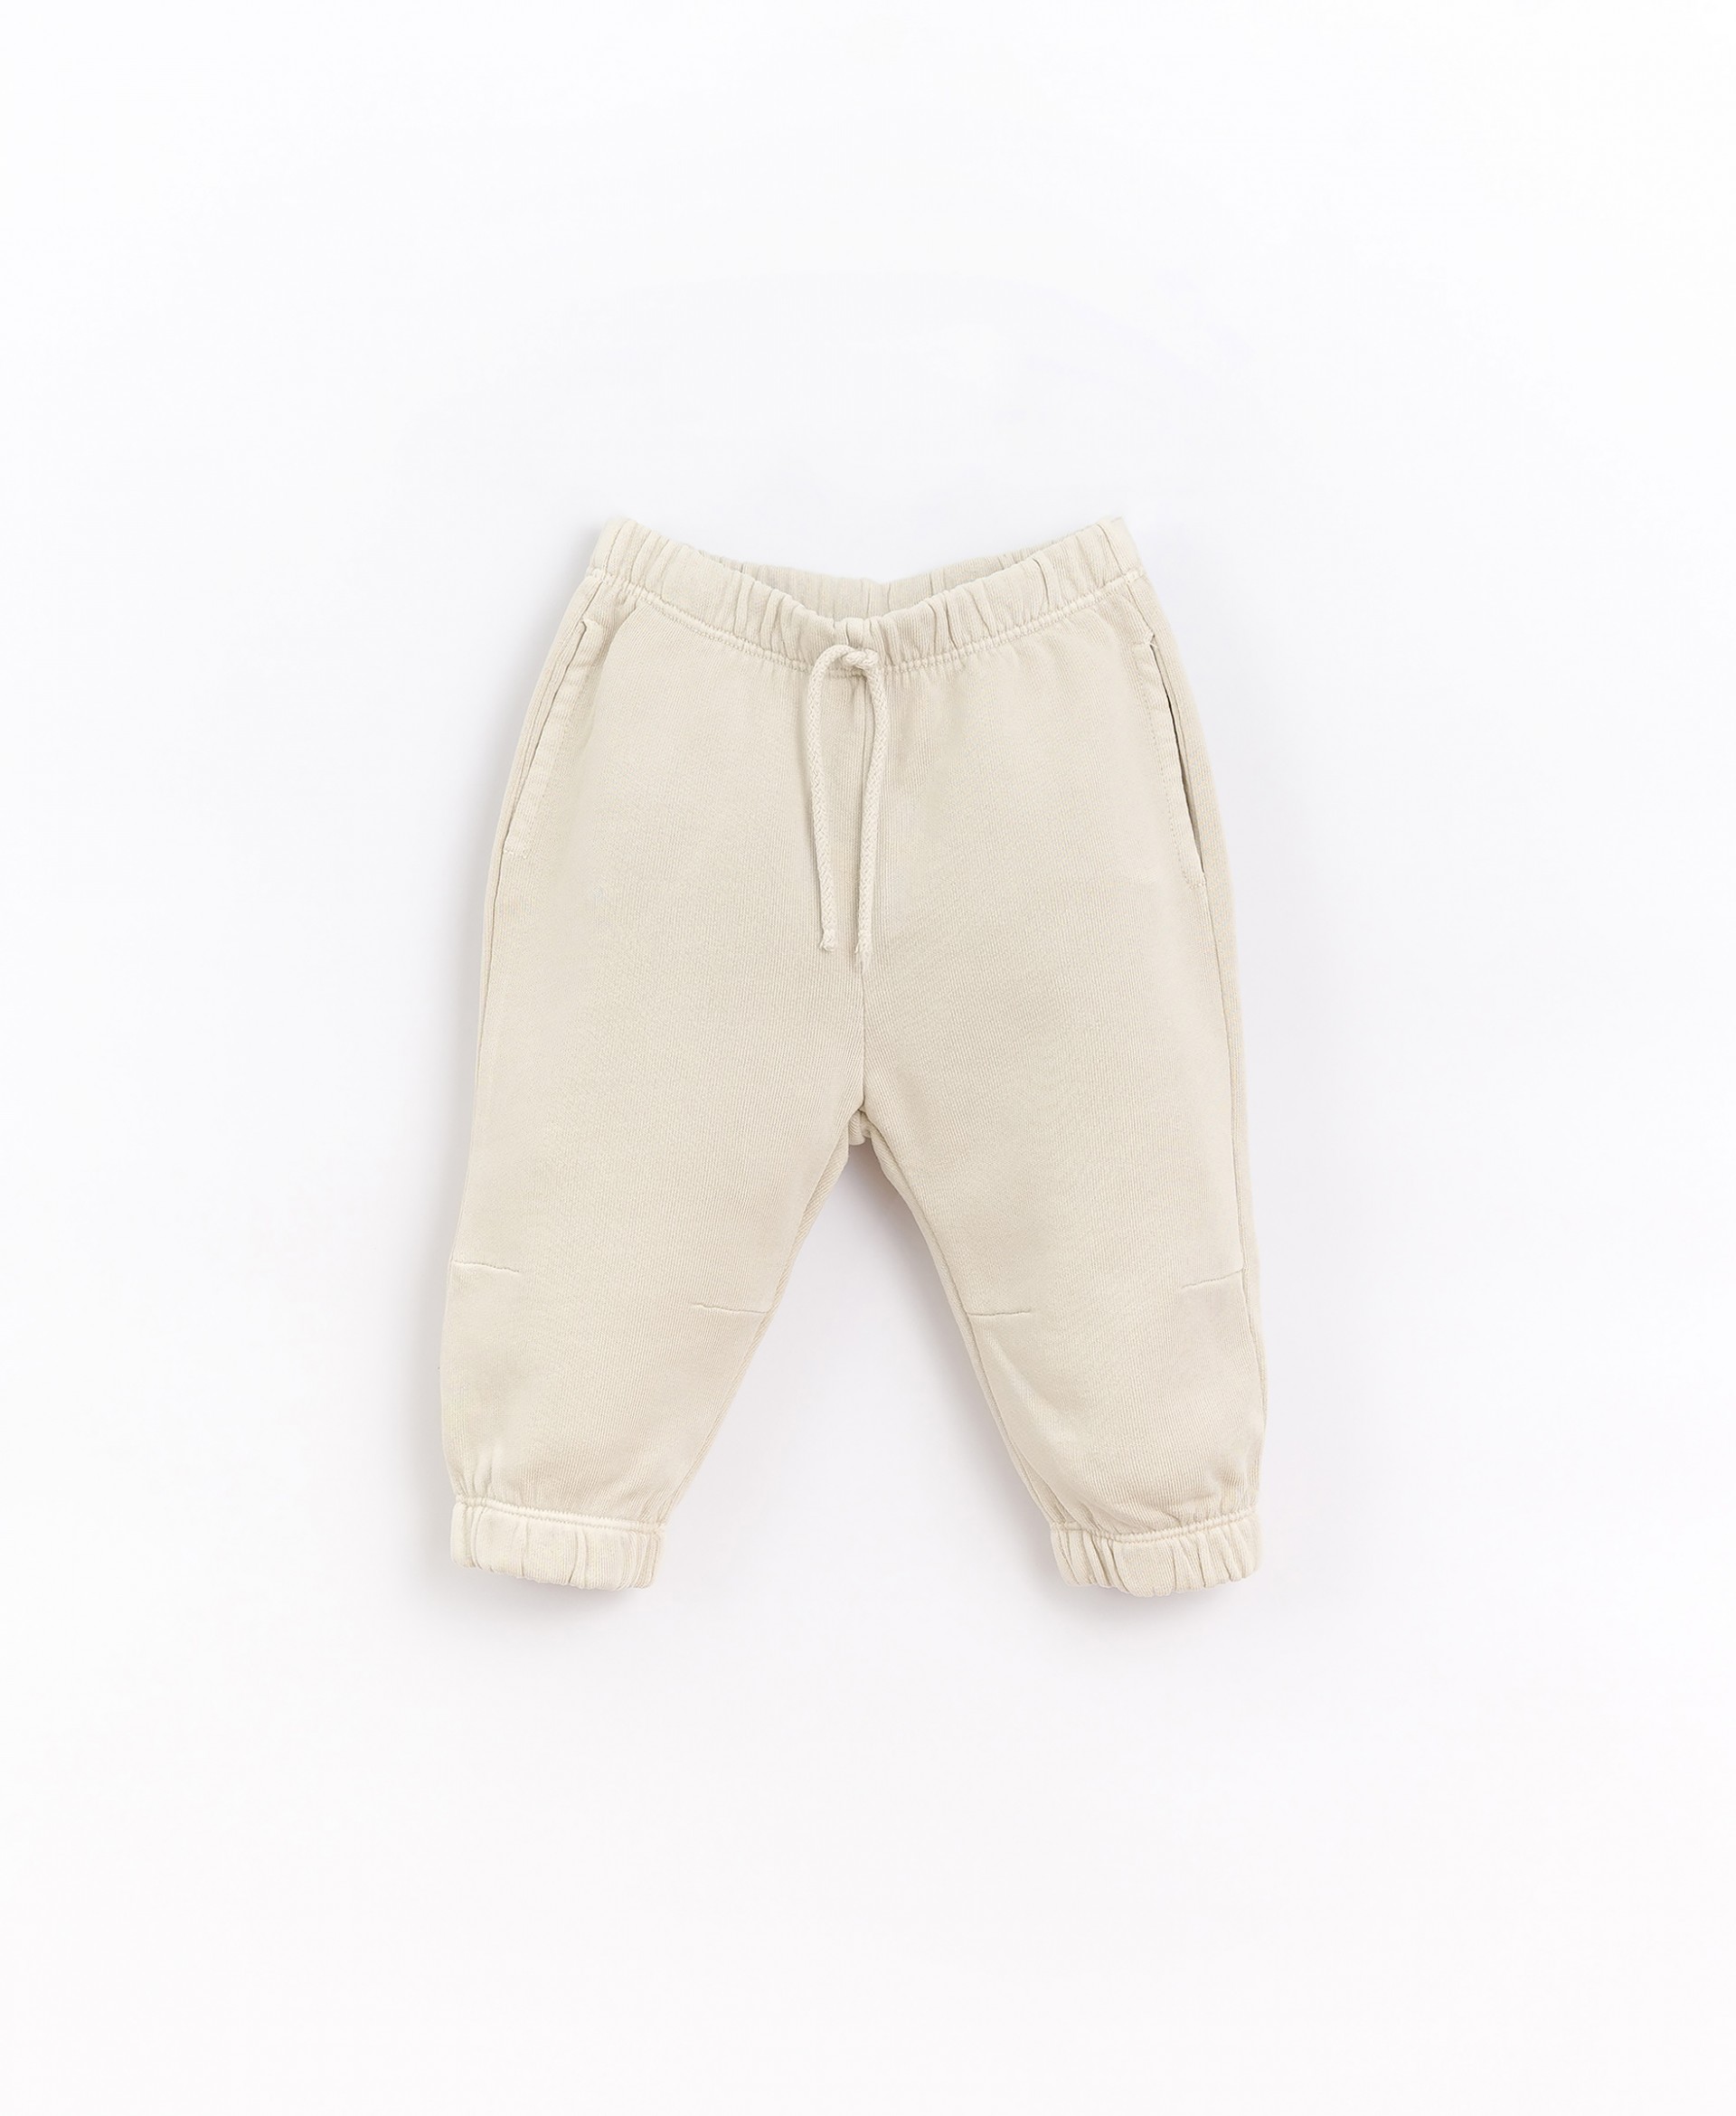 Pants with decorative drawstring and pockets | Basketry